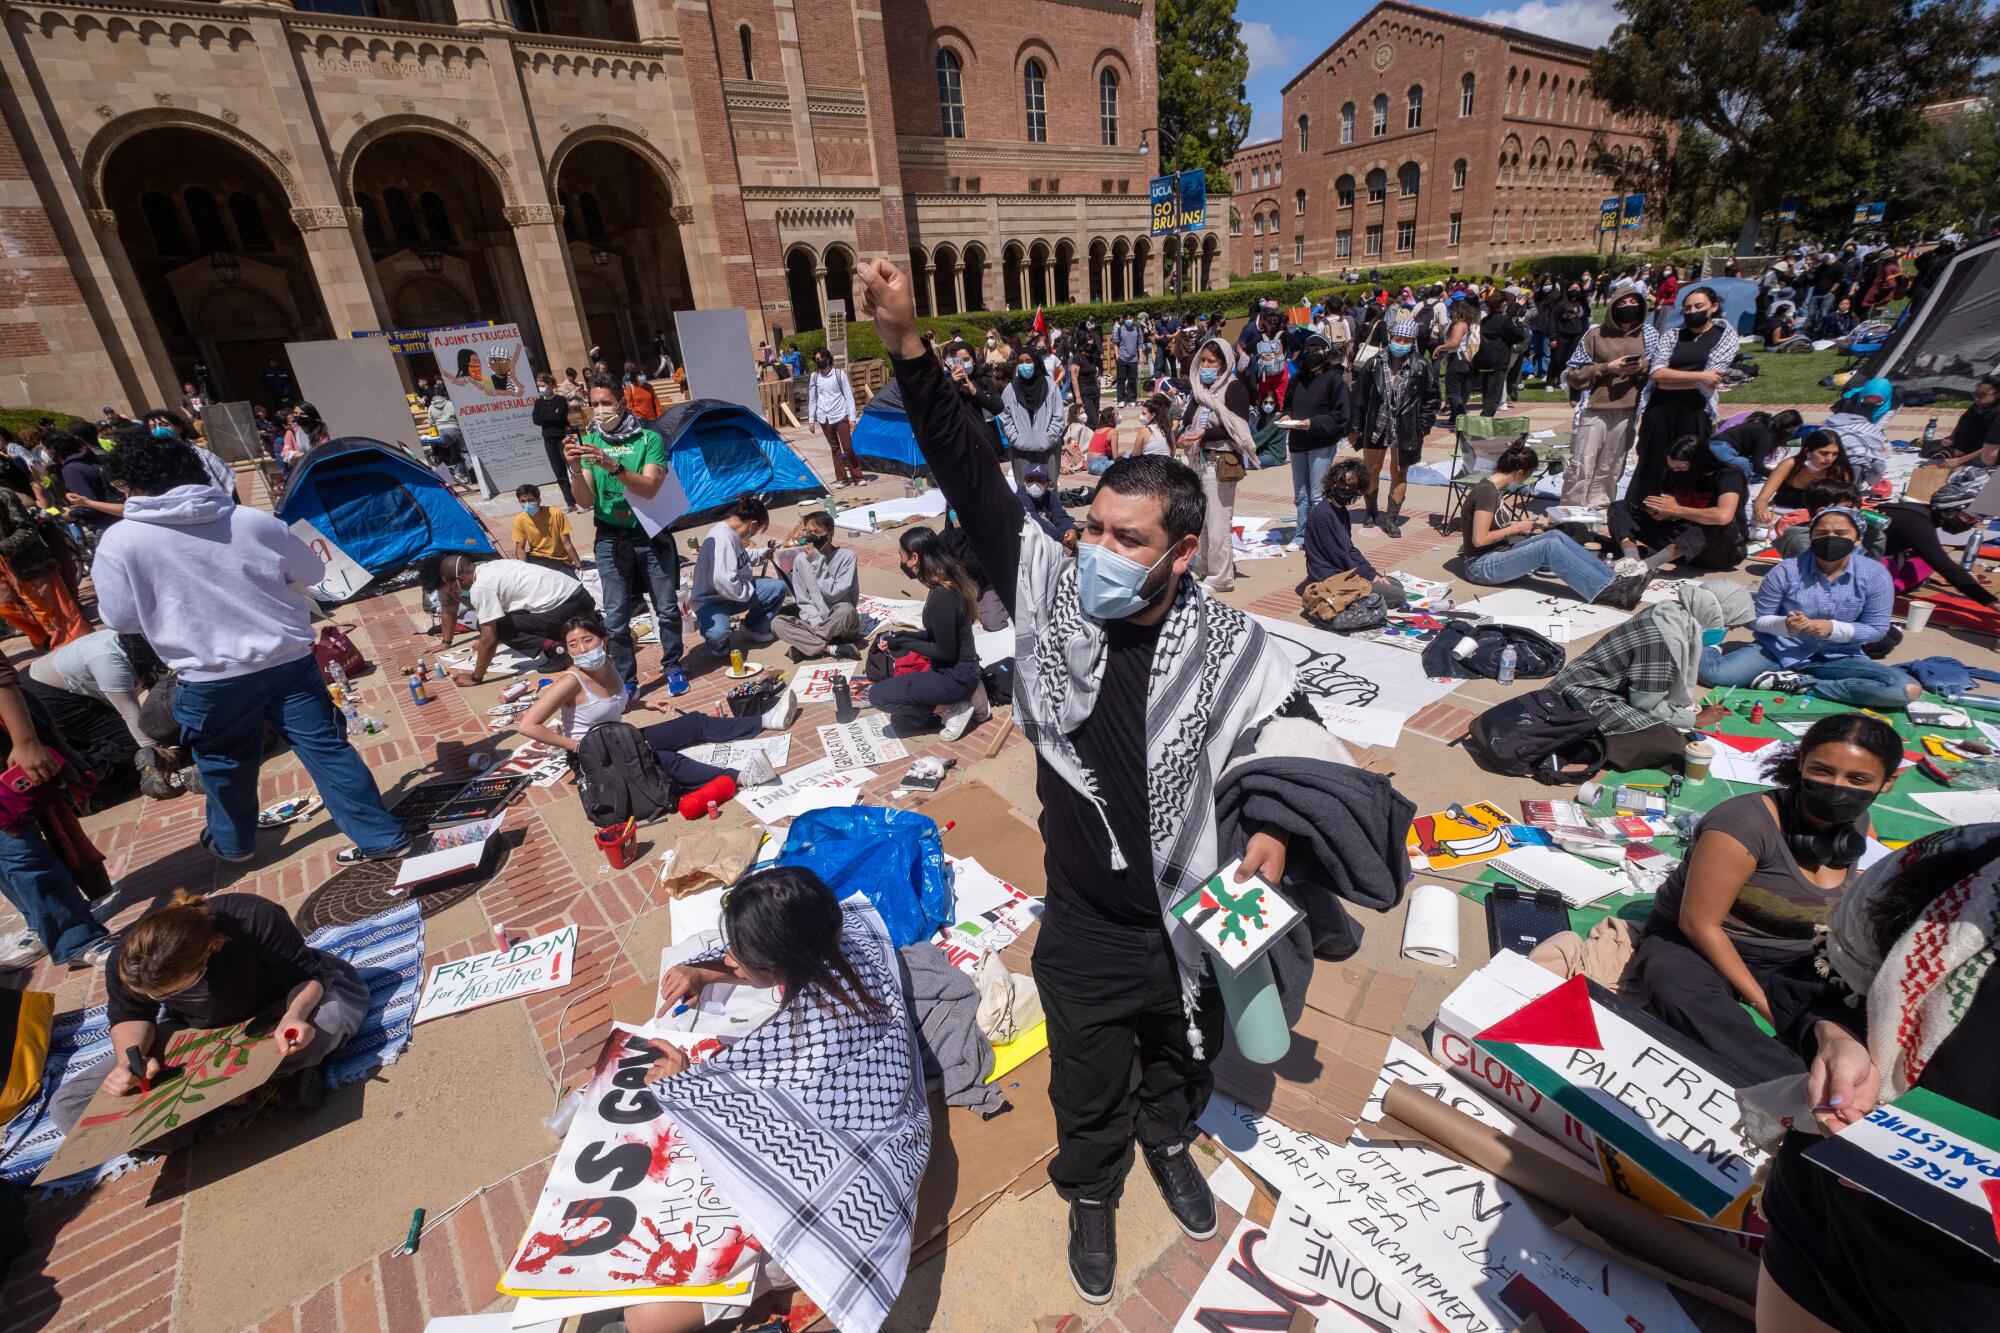 A pro-Palestine protester raises his fist at an encampment set up on the campus of UCLA.